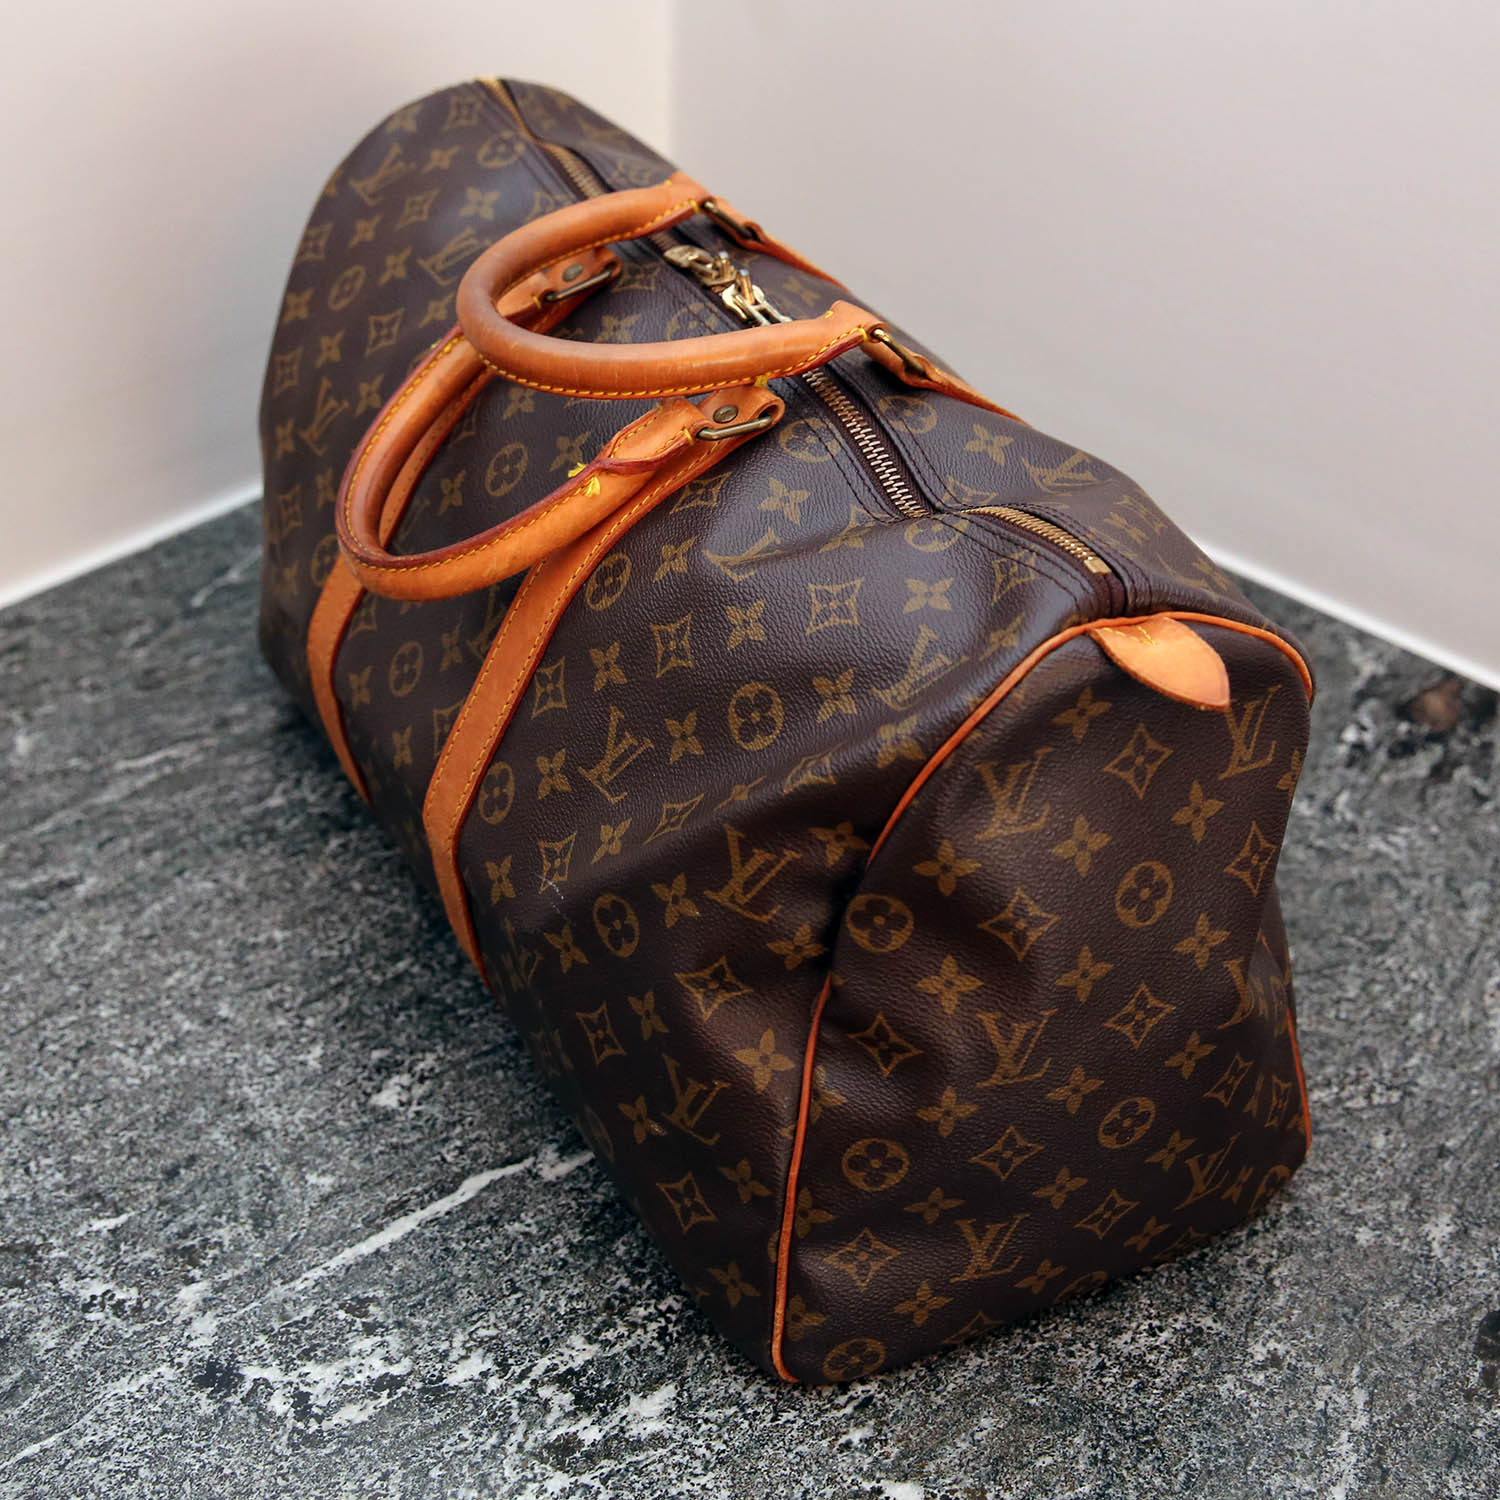 Louis Vuitton Keepall 45 - www.semadata.org - Pre-owned Louis Vuitton and other luxury brands